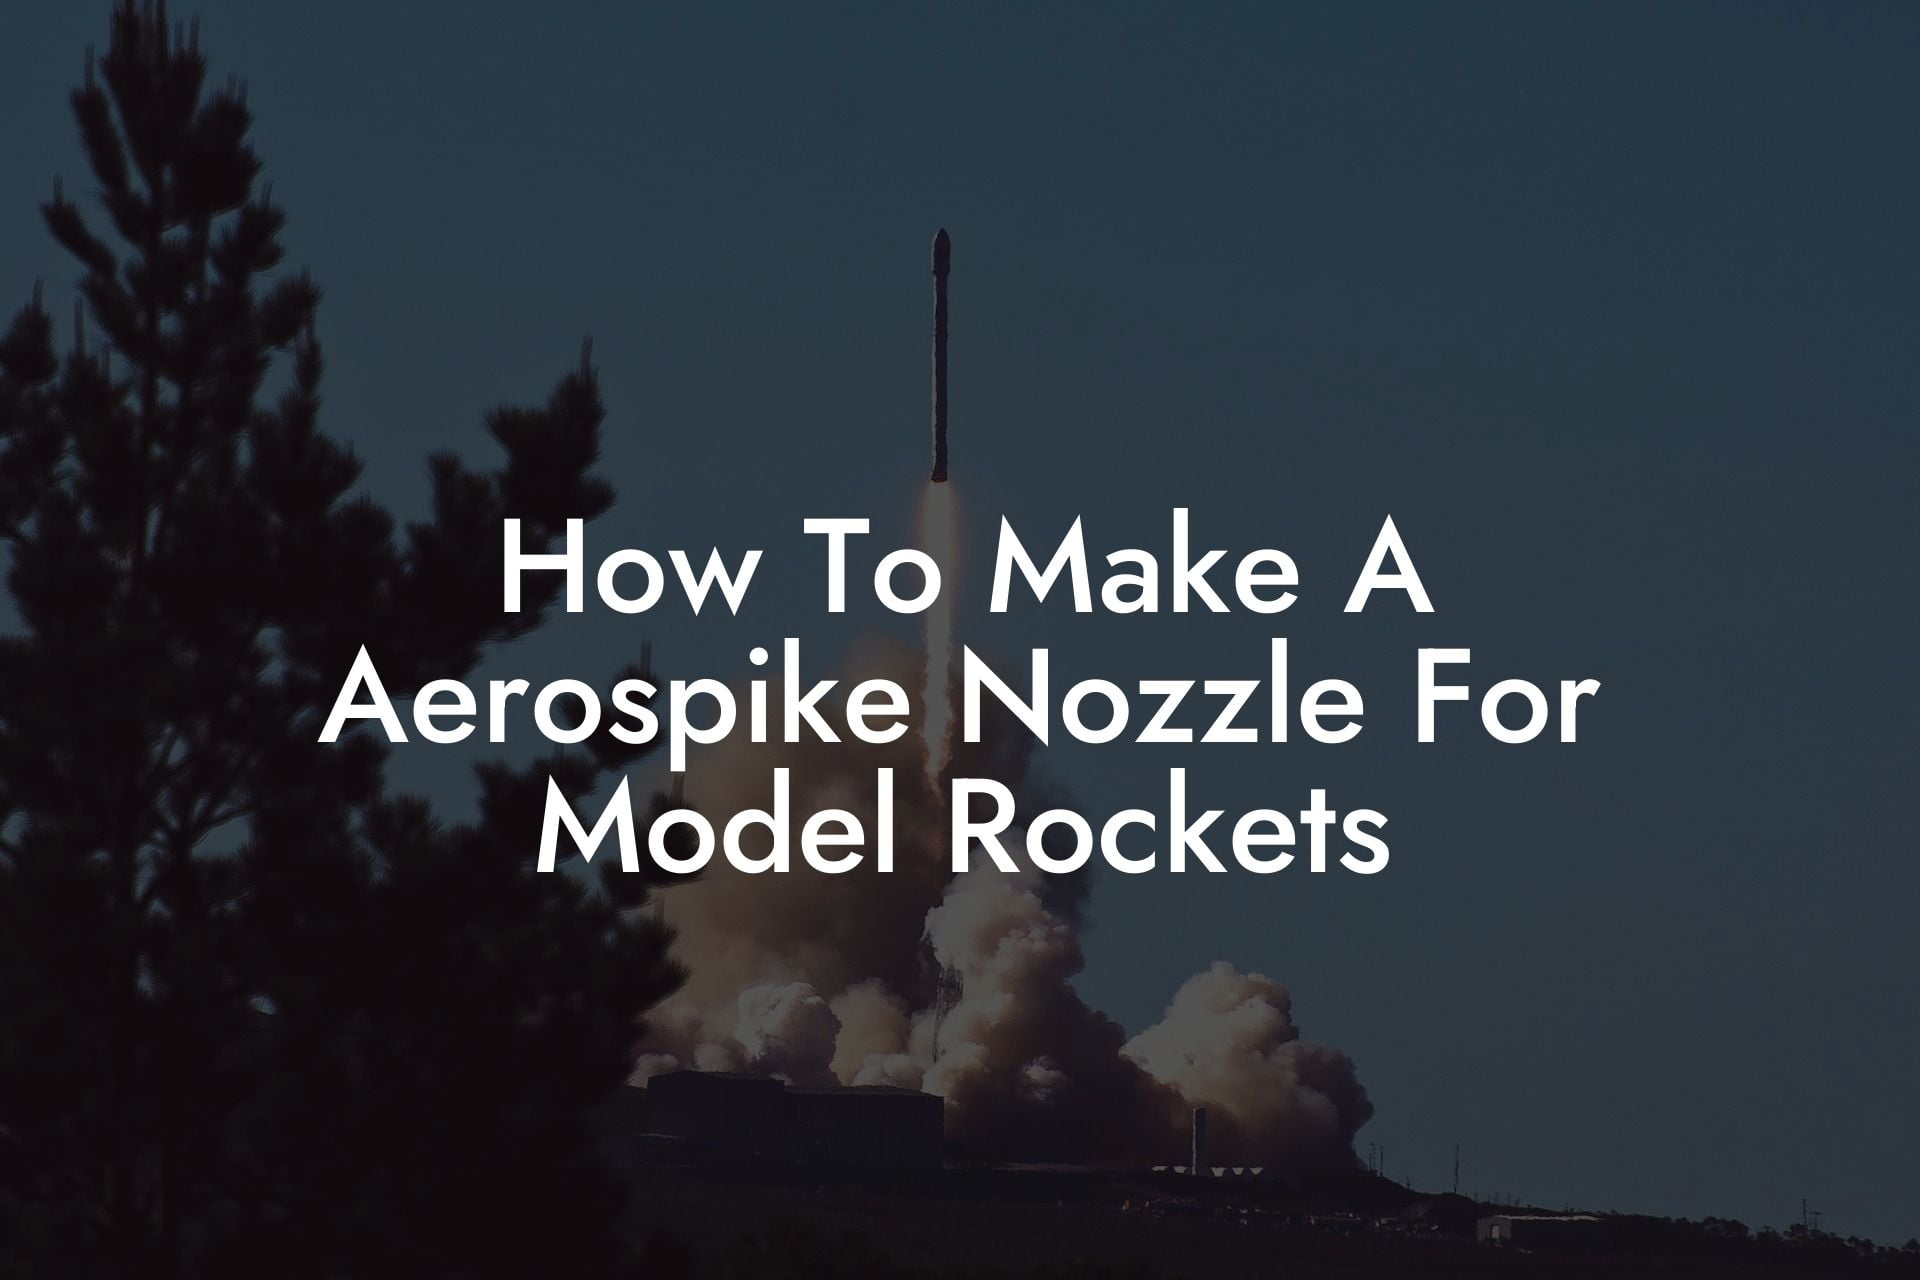 How To Make A Aerospike Nozzle For Model Rockets